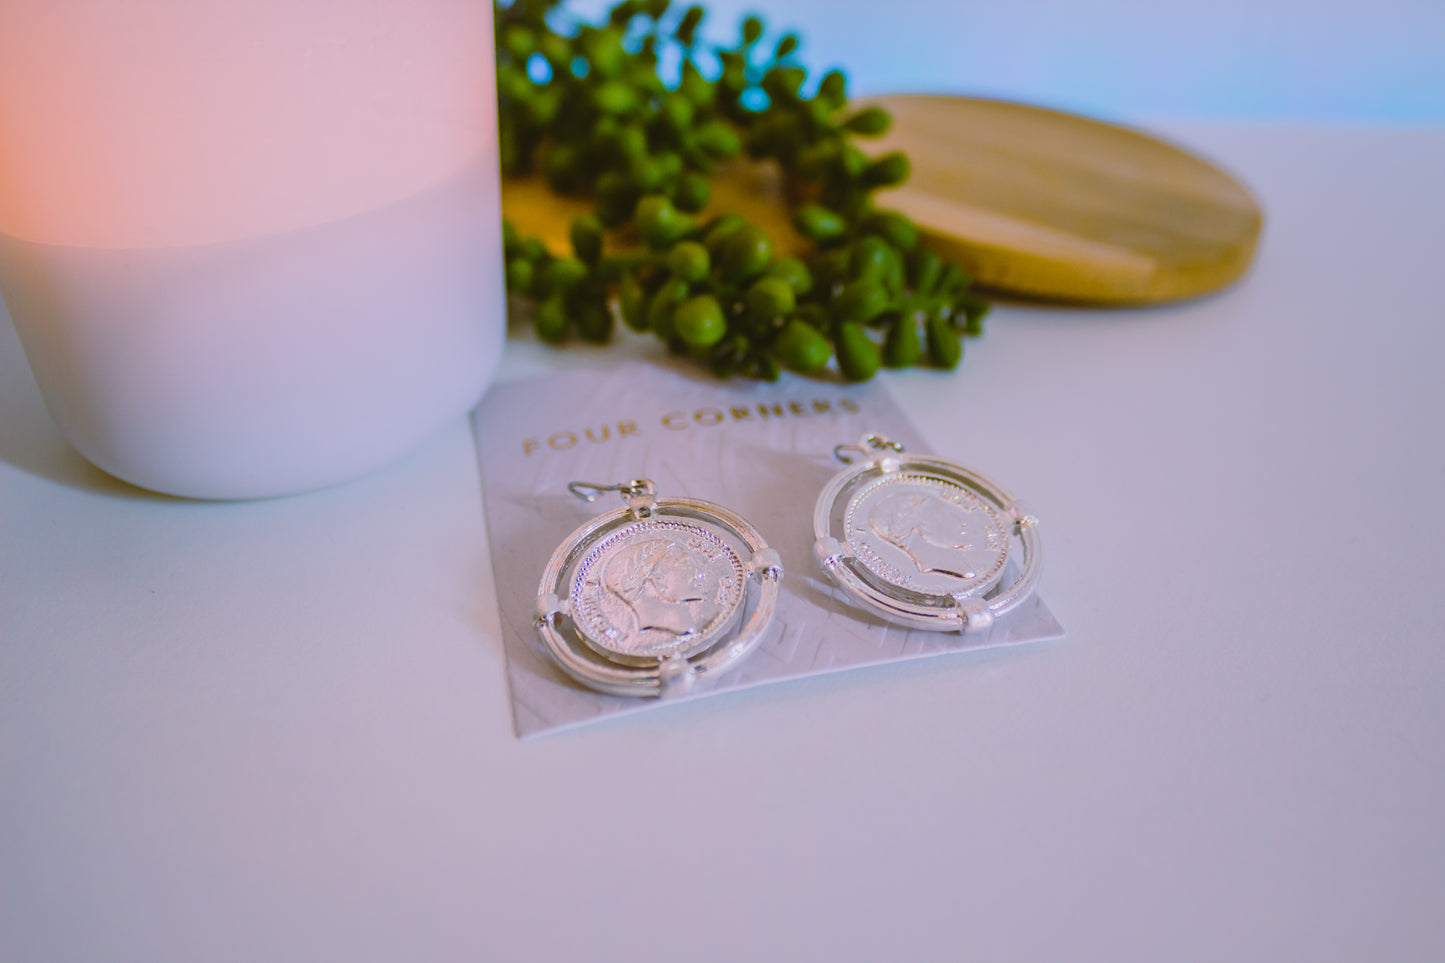 FOUR CORNERS EARRINGS - SILVER COIN - RV